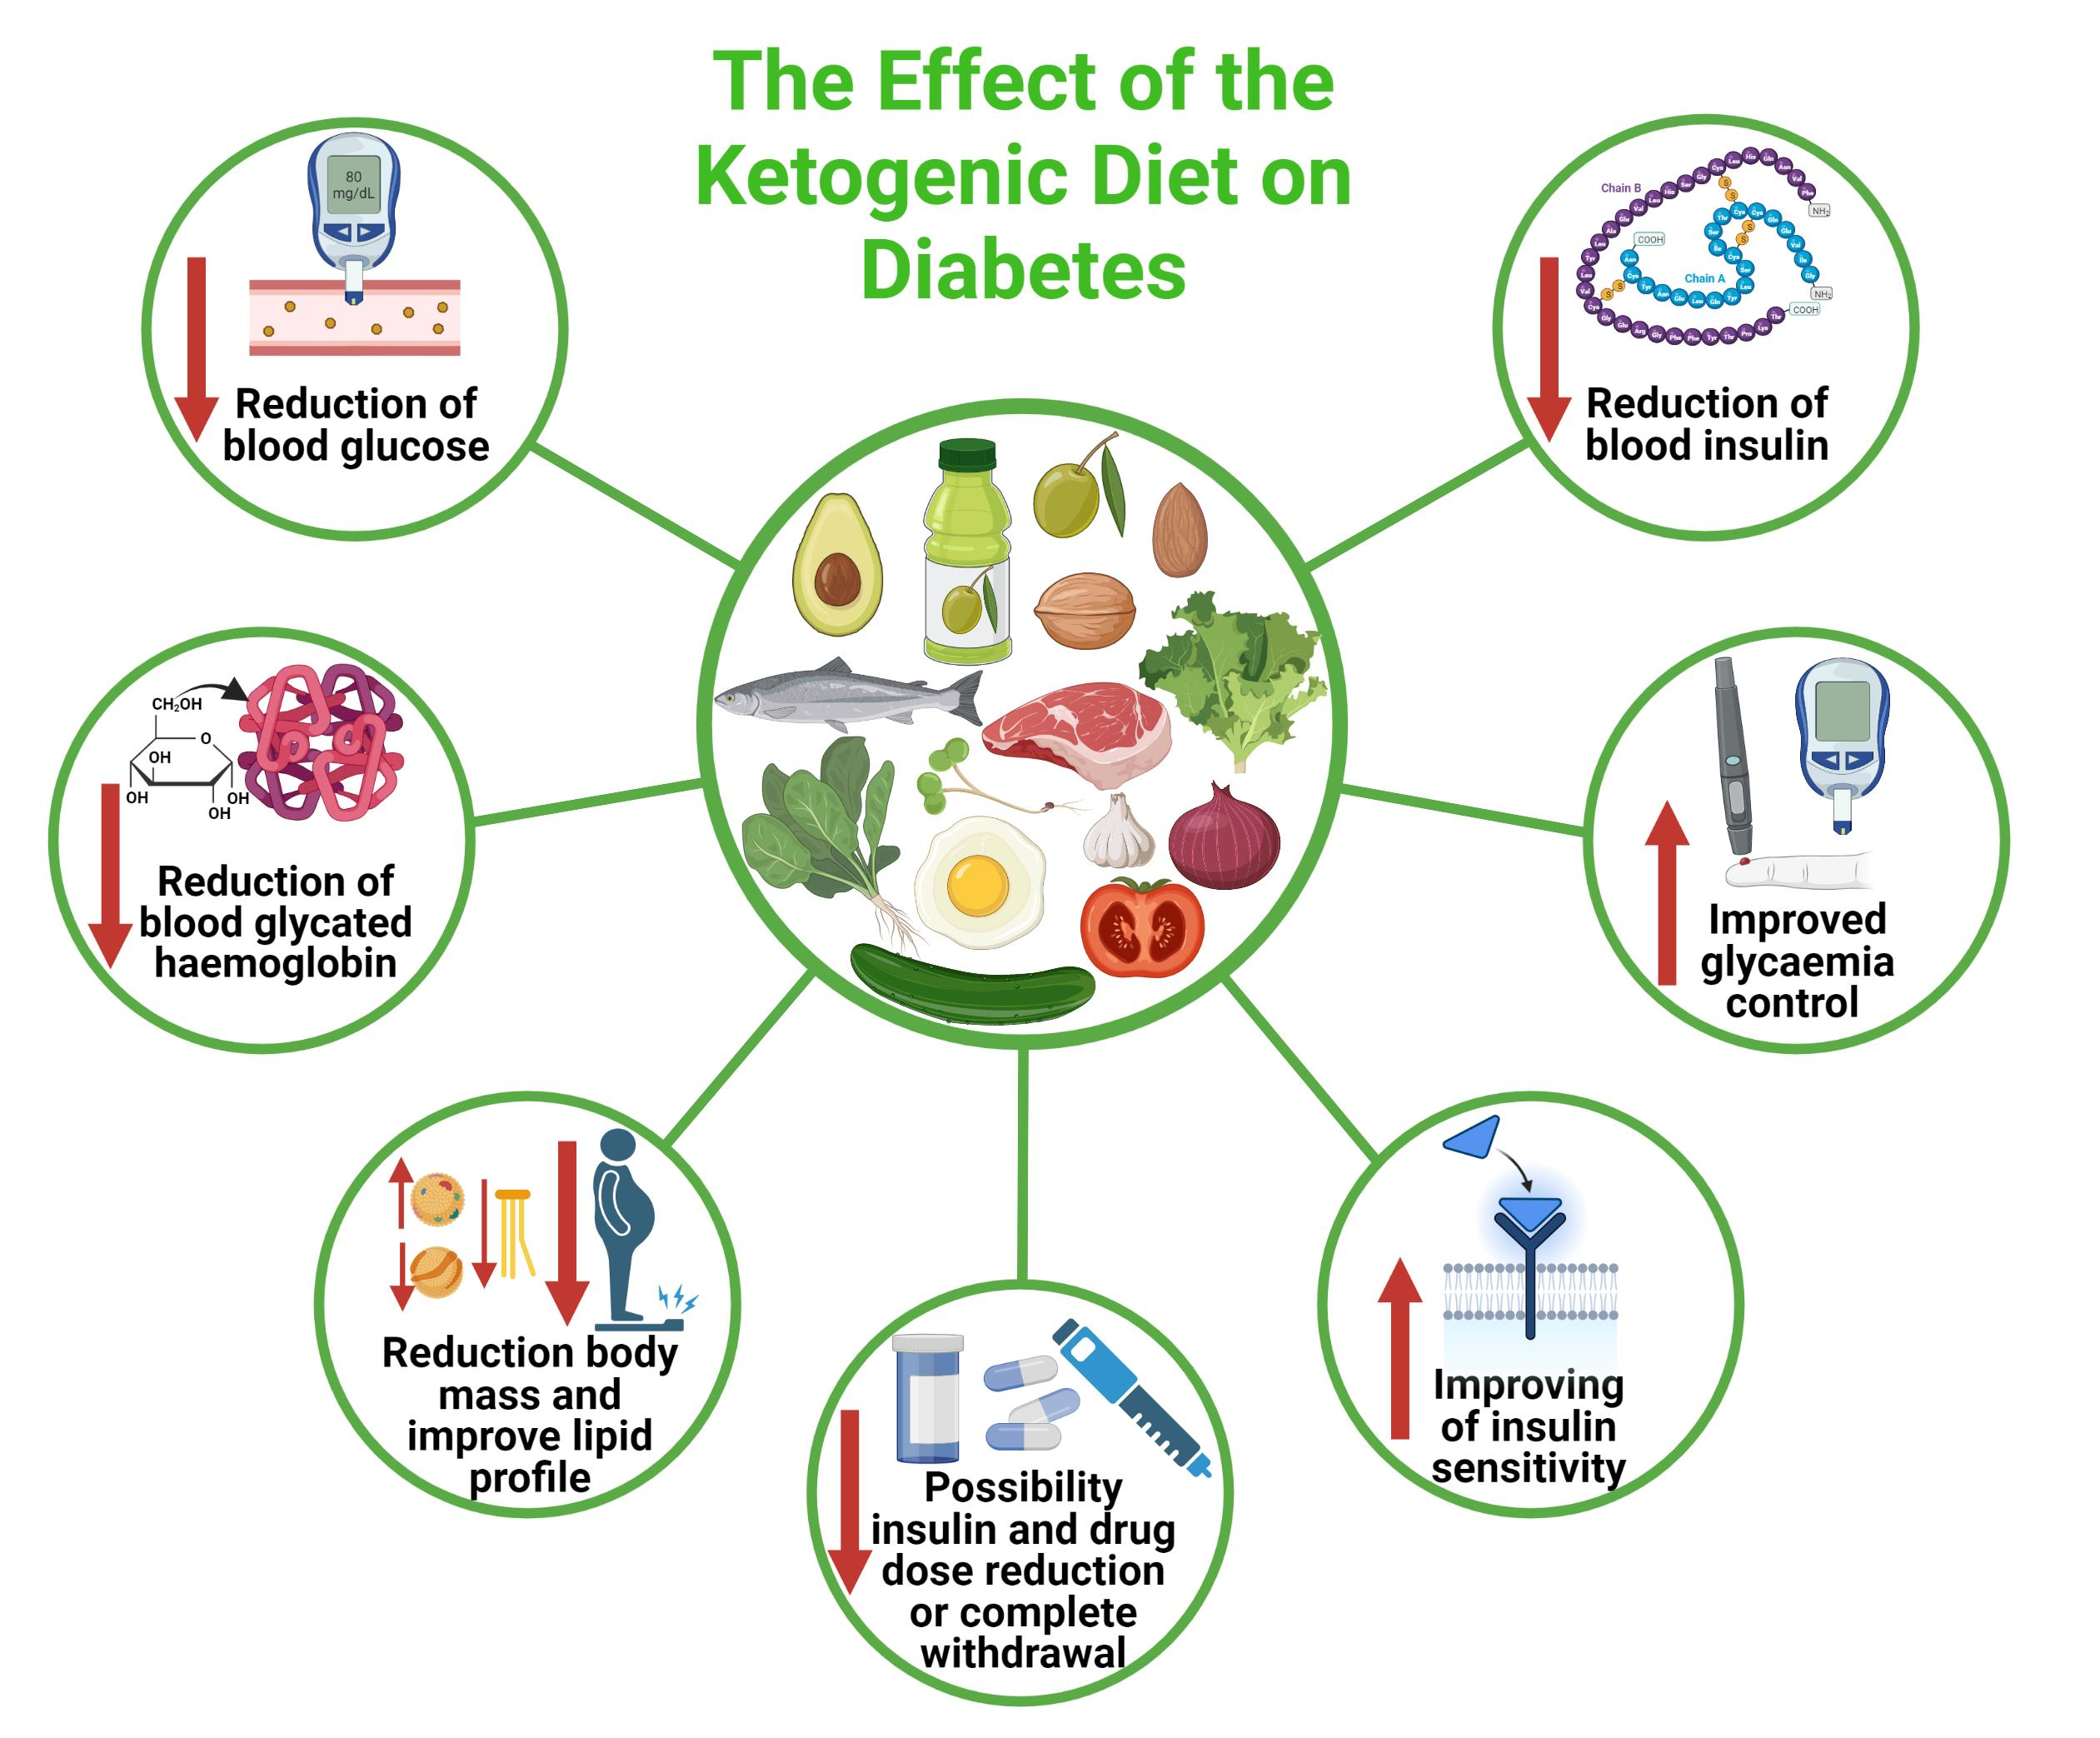 What Is A Good Diet Plan For Diabetics To Lose Weight? - Tata 1mg